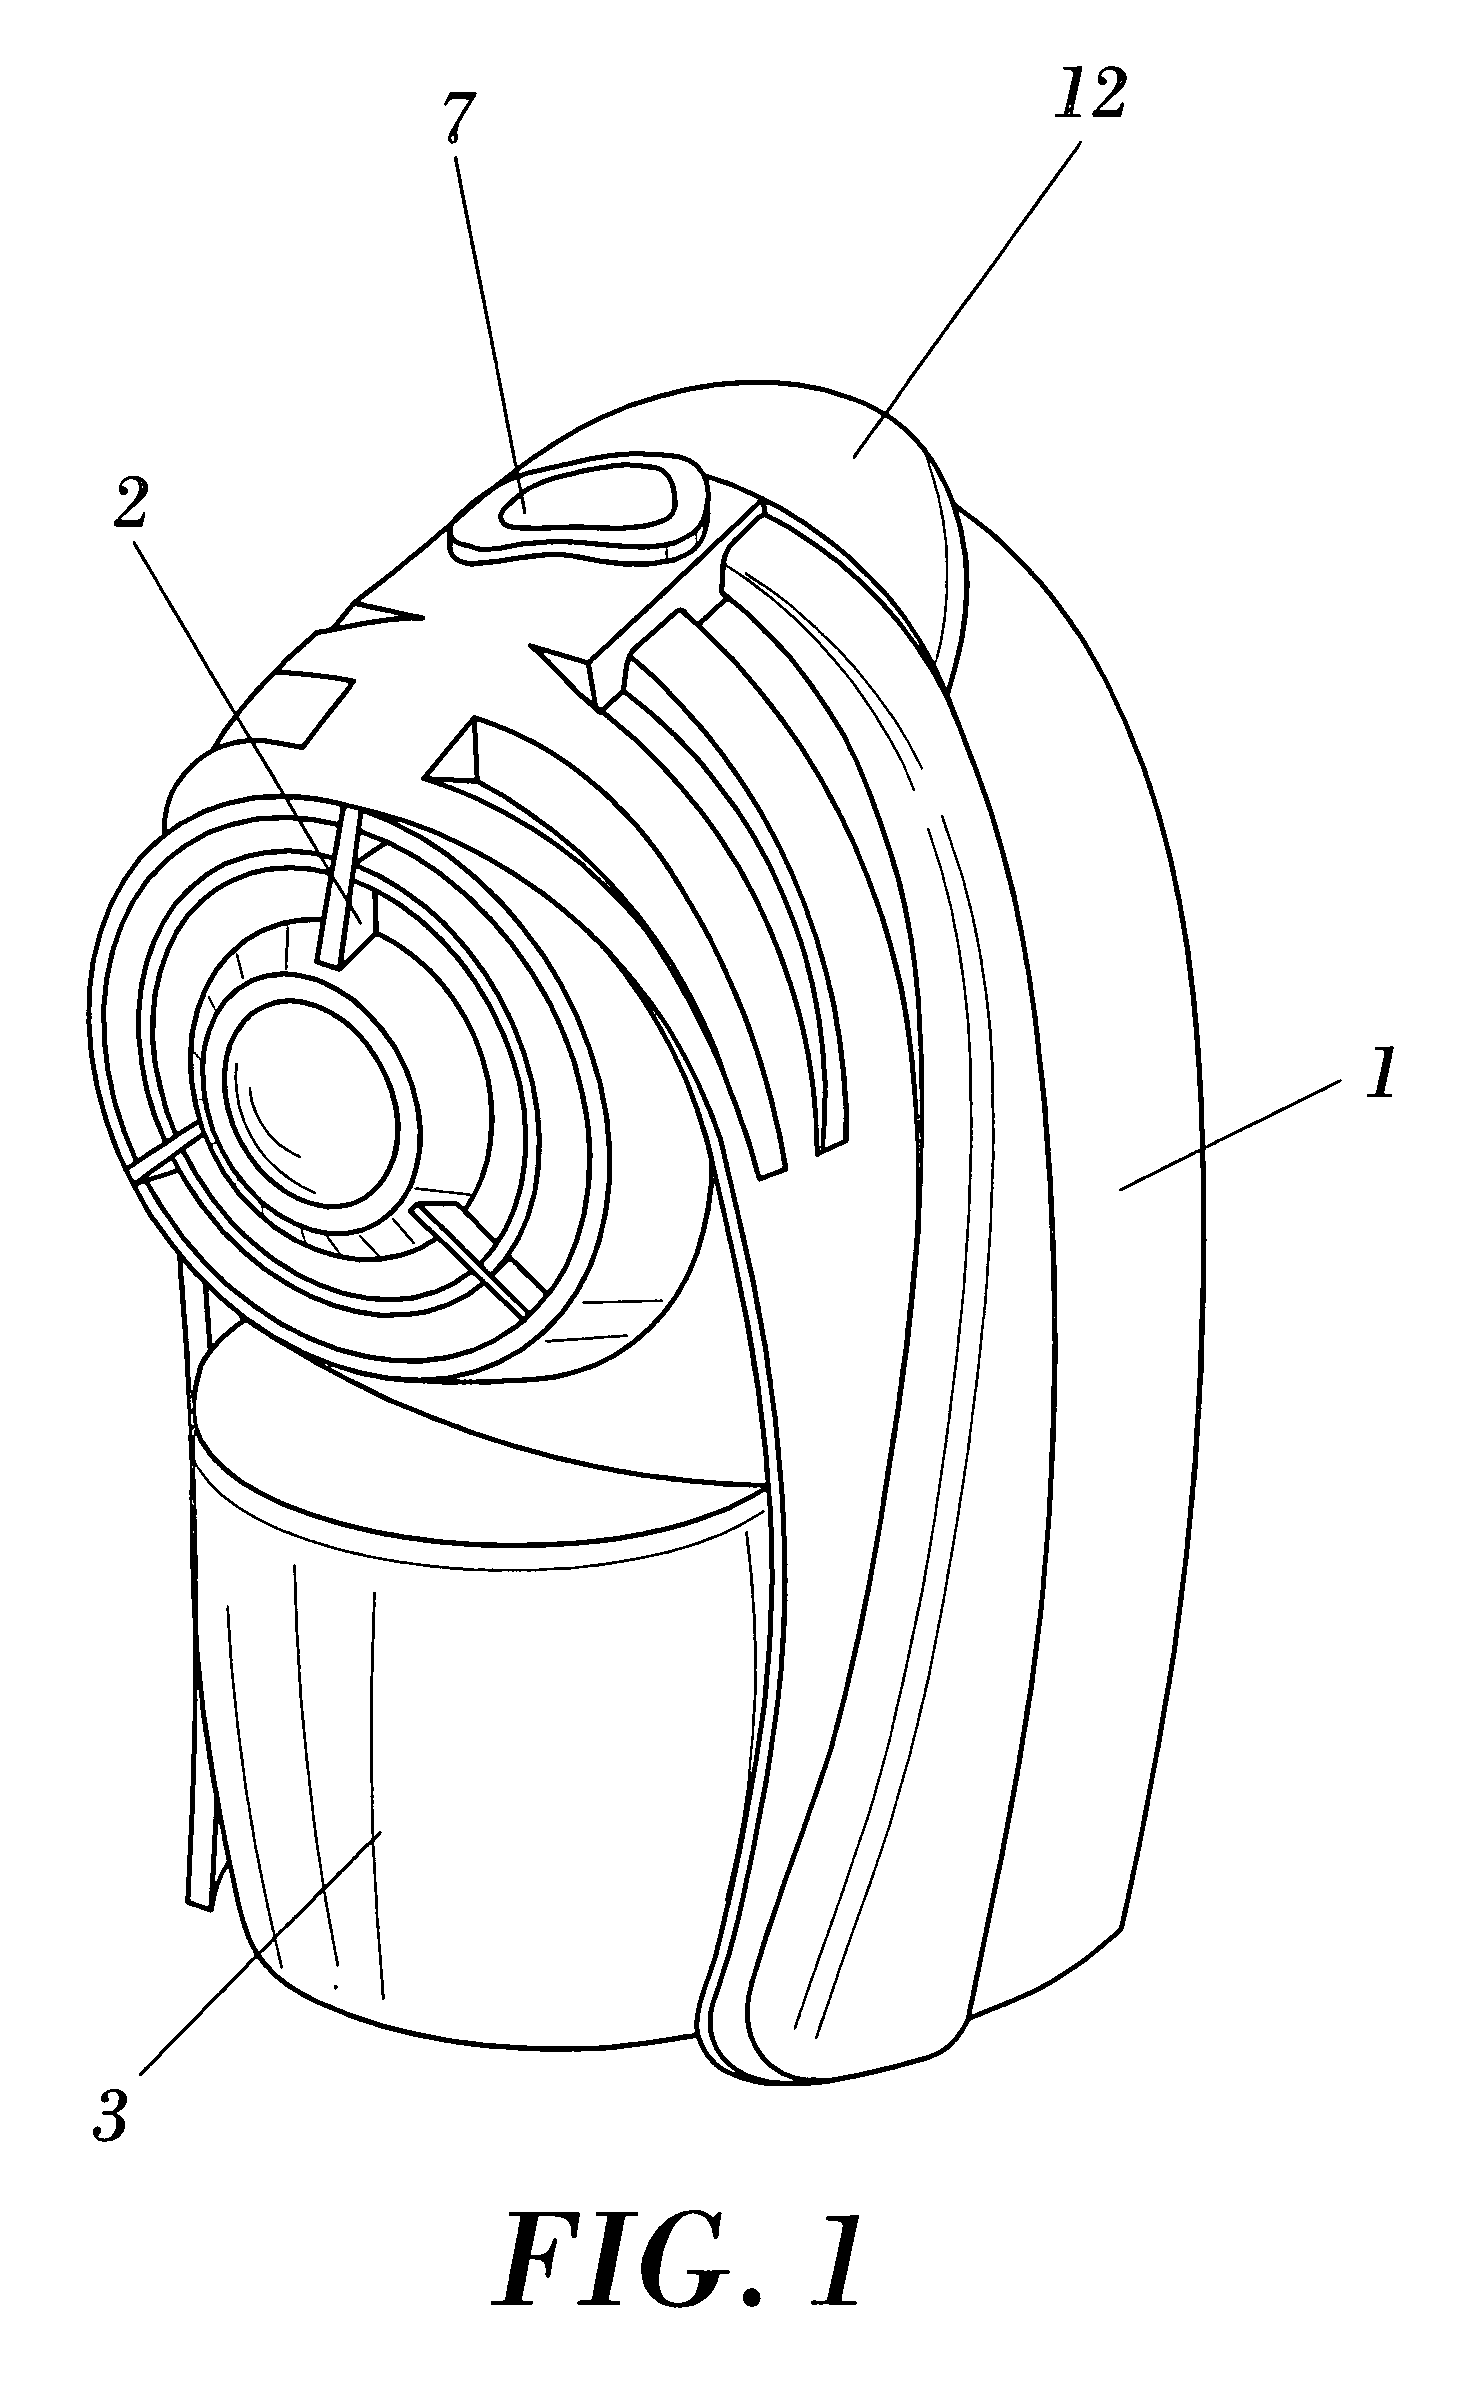 Evaporator device for active substances with fan